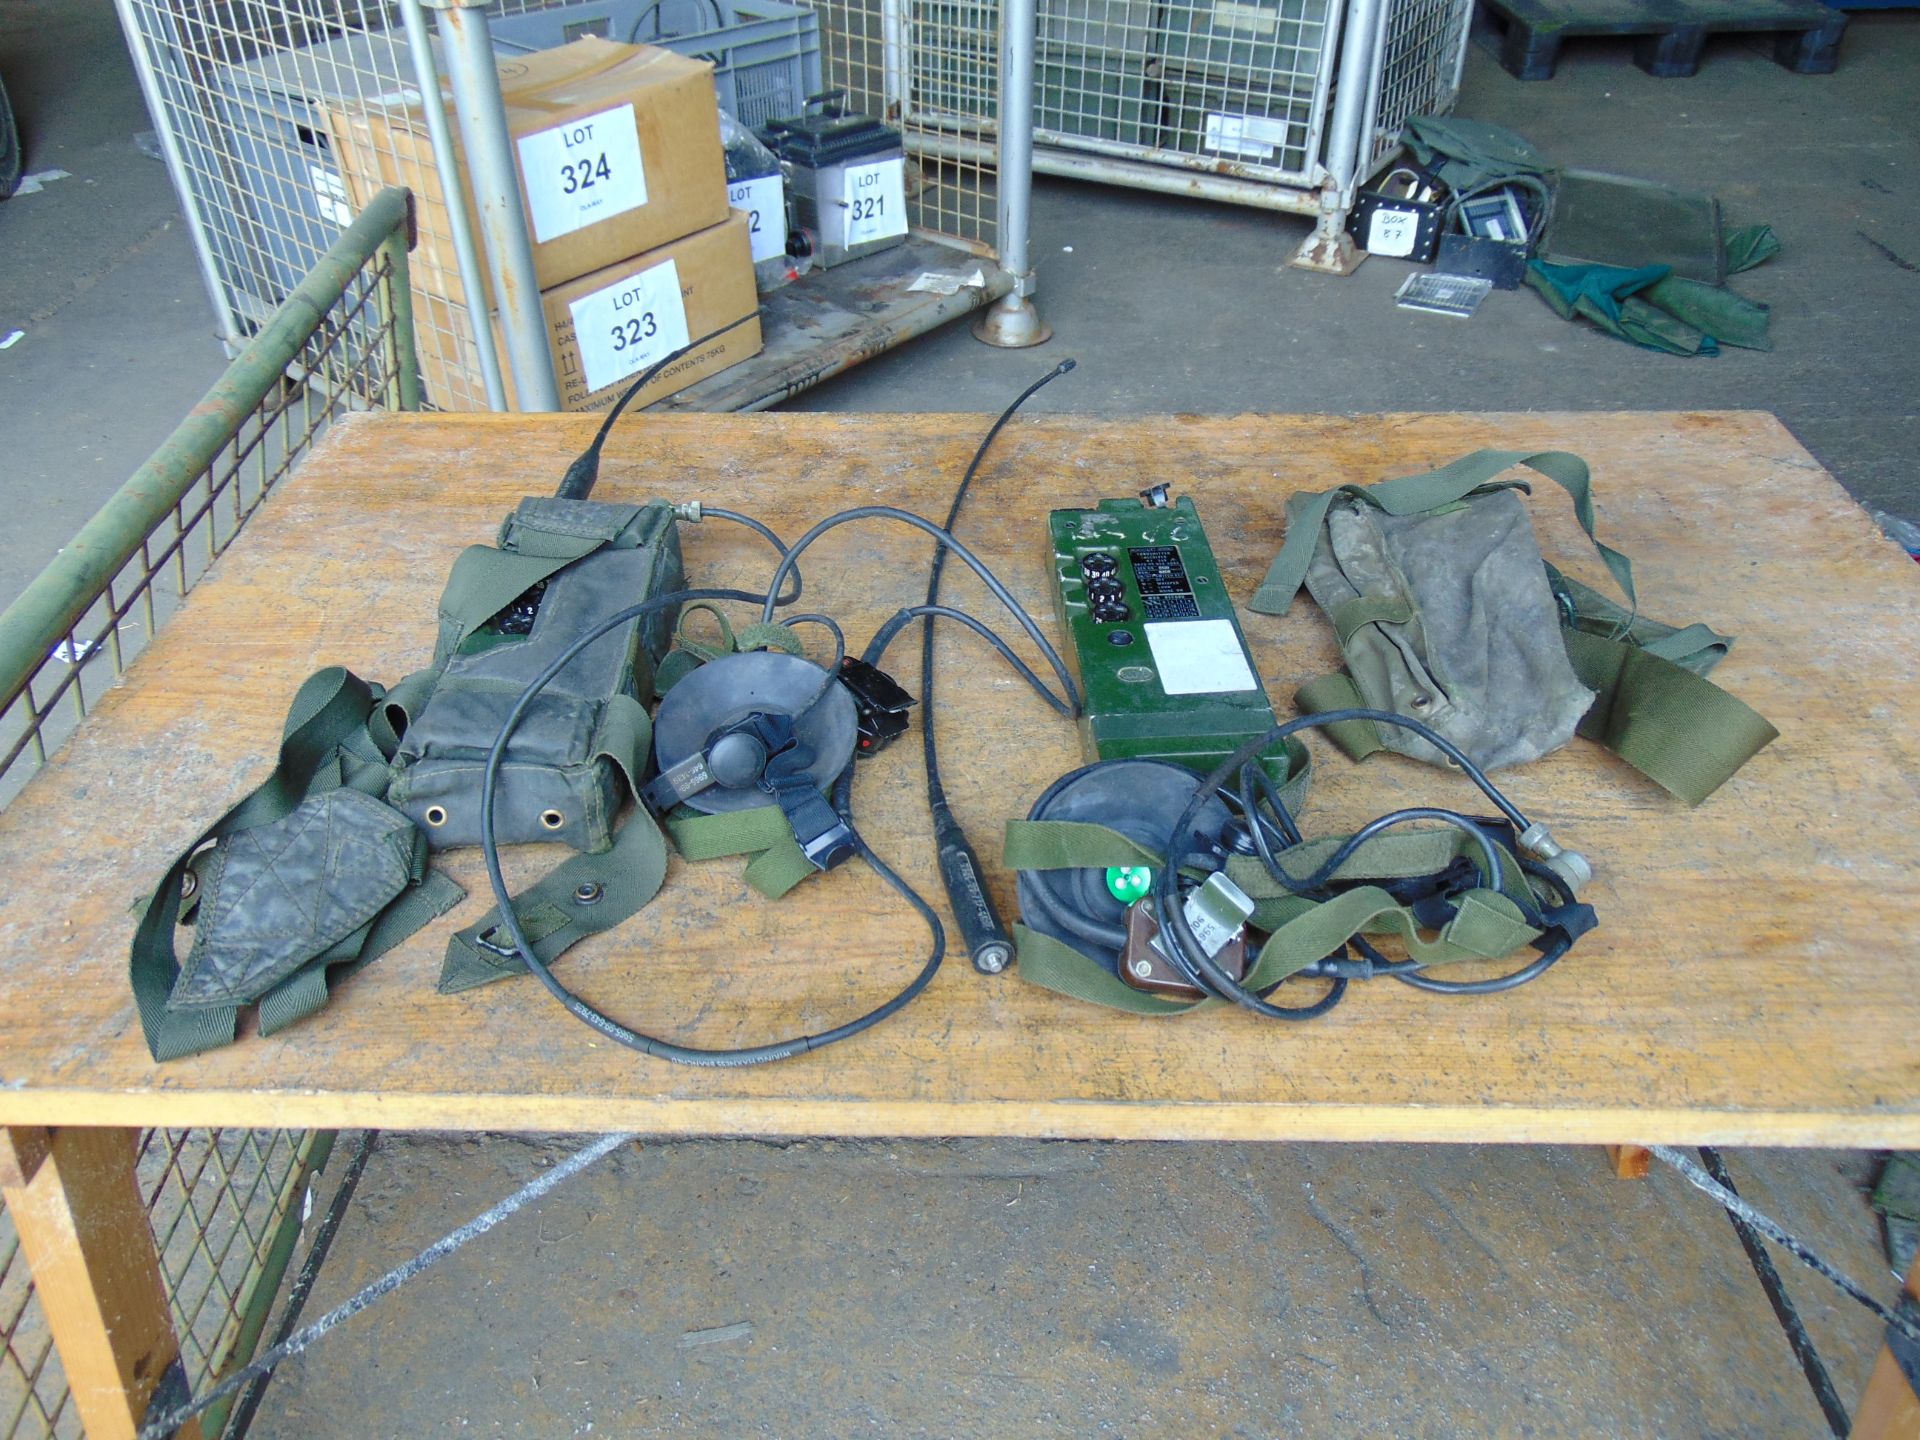 2 x RT 349 British Army Transmitter / Receiver c/w Pouch, Headset, Antenna and Battery Cassette. - Image 2 of 5